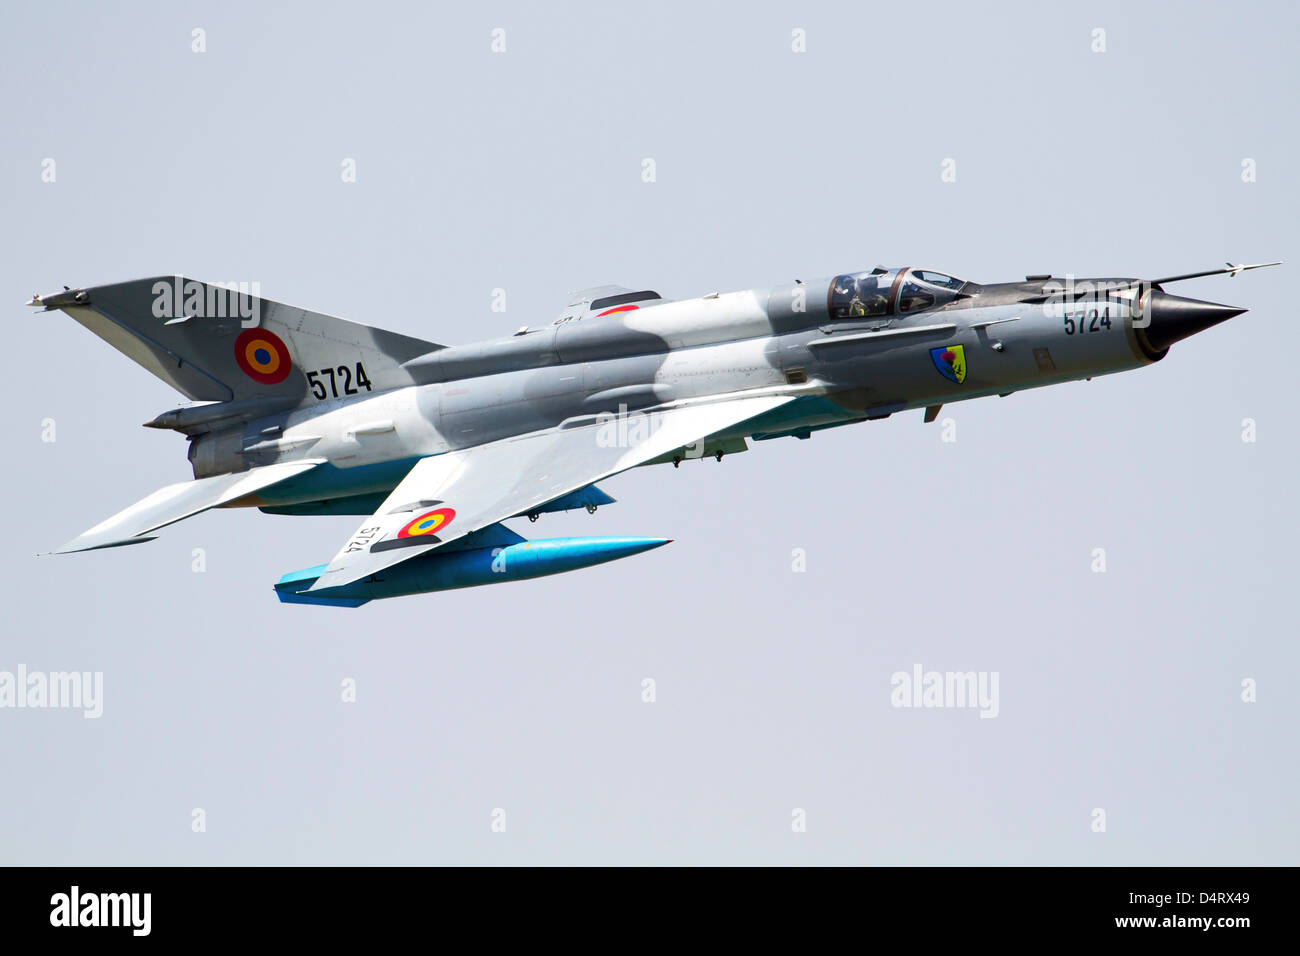 A Romanian Air Force MiG-21 MF LanceR-C performs at the Bucharest International Air Show 2012, Romania. Stock Photo